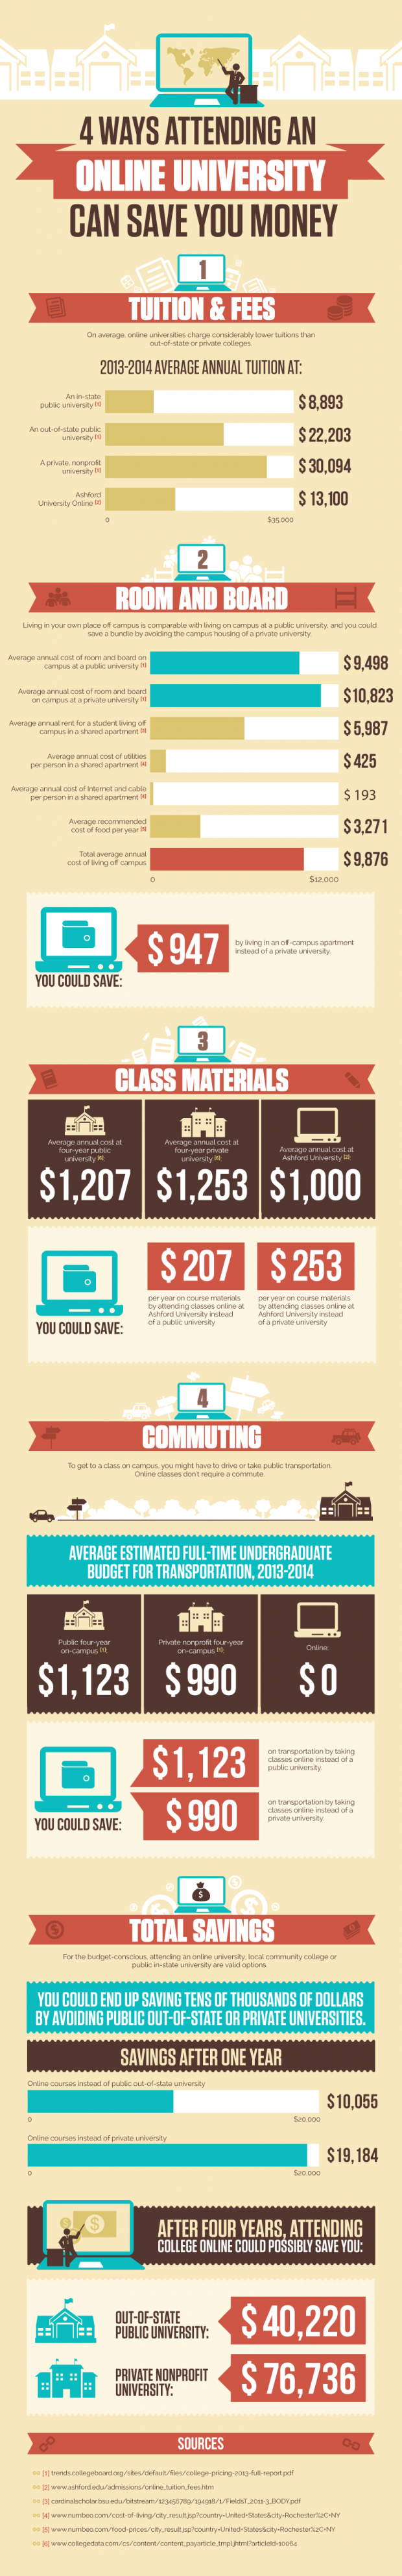 info-graph-02212017-how-online-education-can-save-you-money